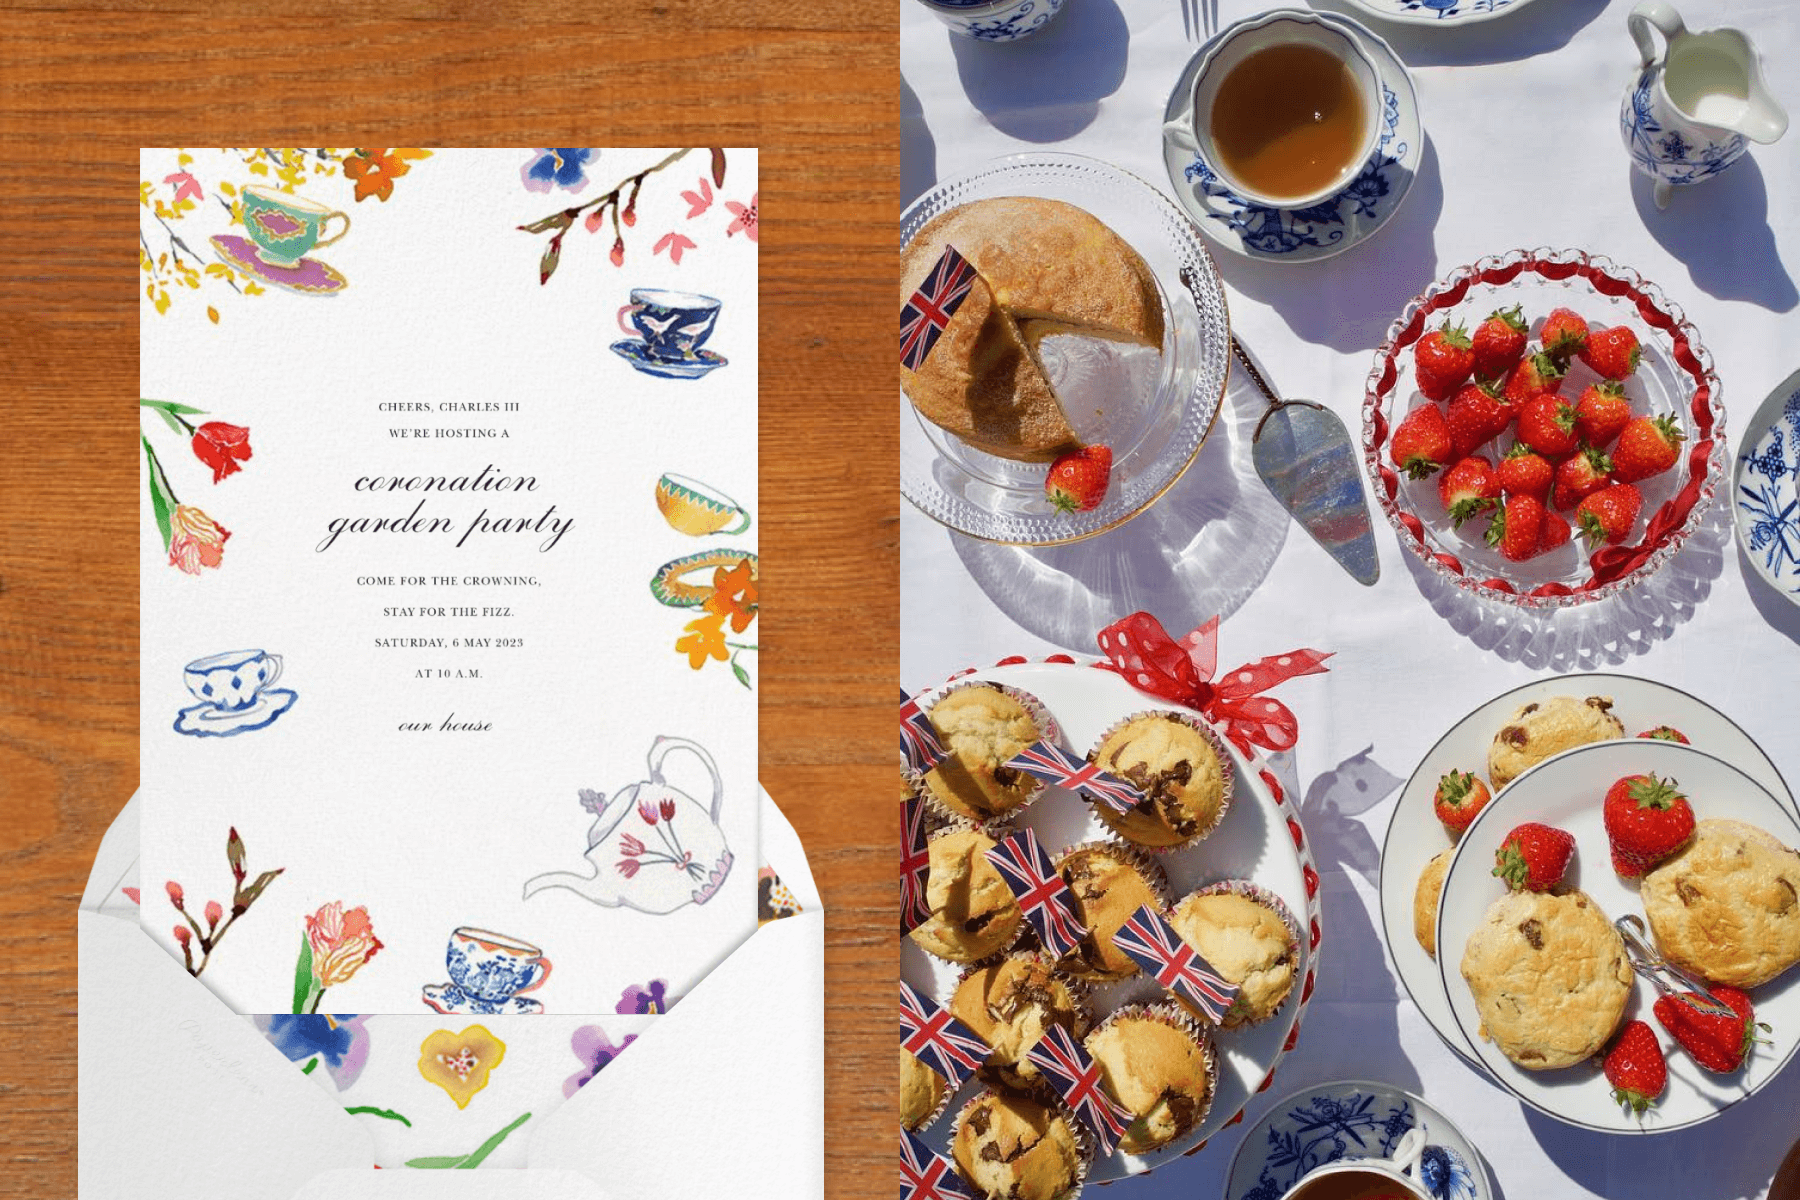 Left: An invitation with watercolor paintings of tea cups, tea pots, and flowers around the border. Right: A table spread with muffins, cakes, cookies, strawberries, and tea with Union Jack toothpicks stuck into some.